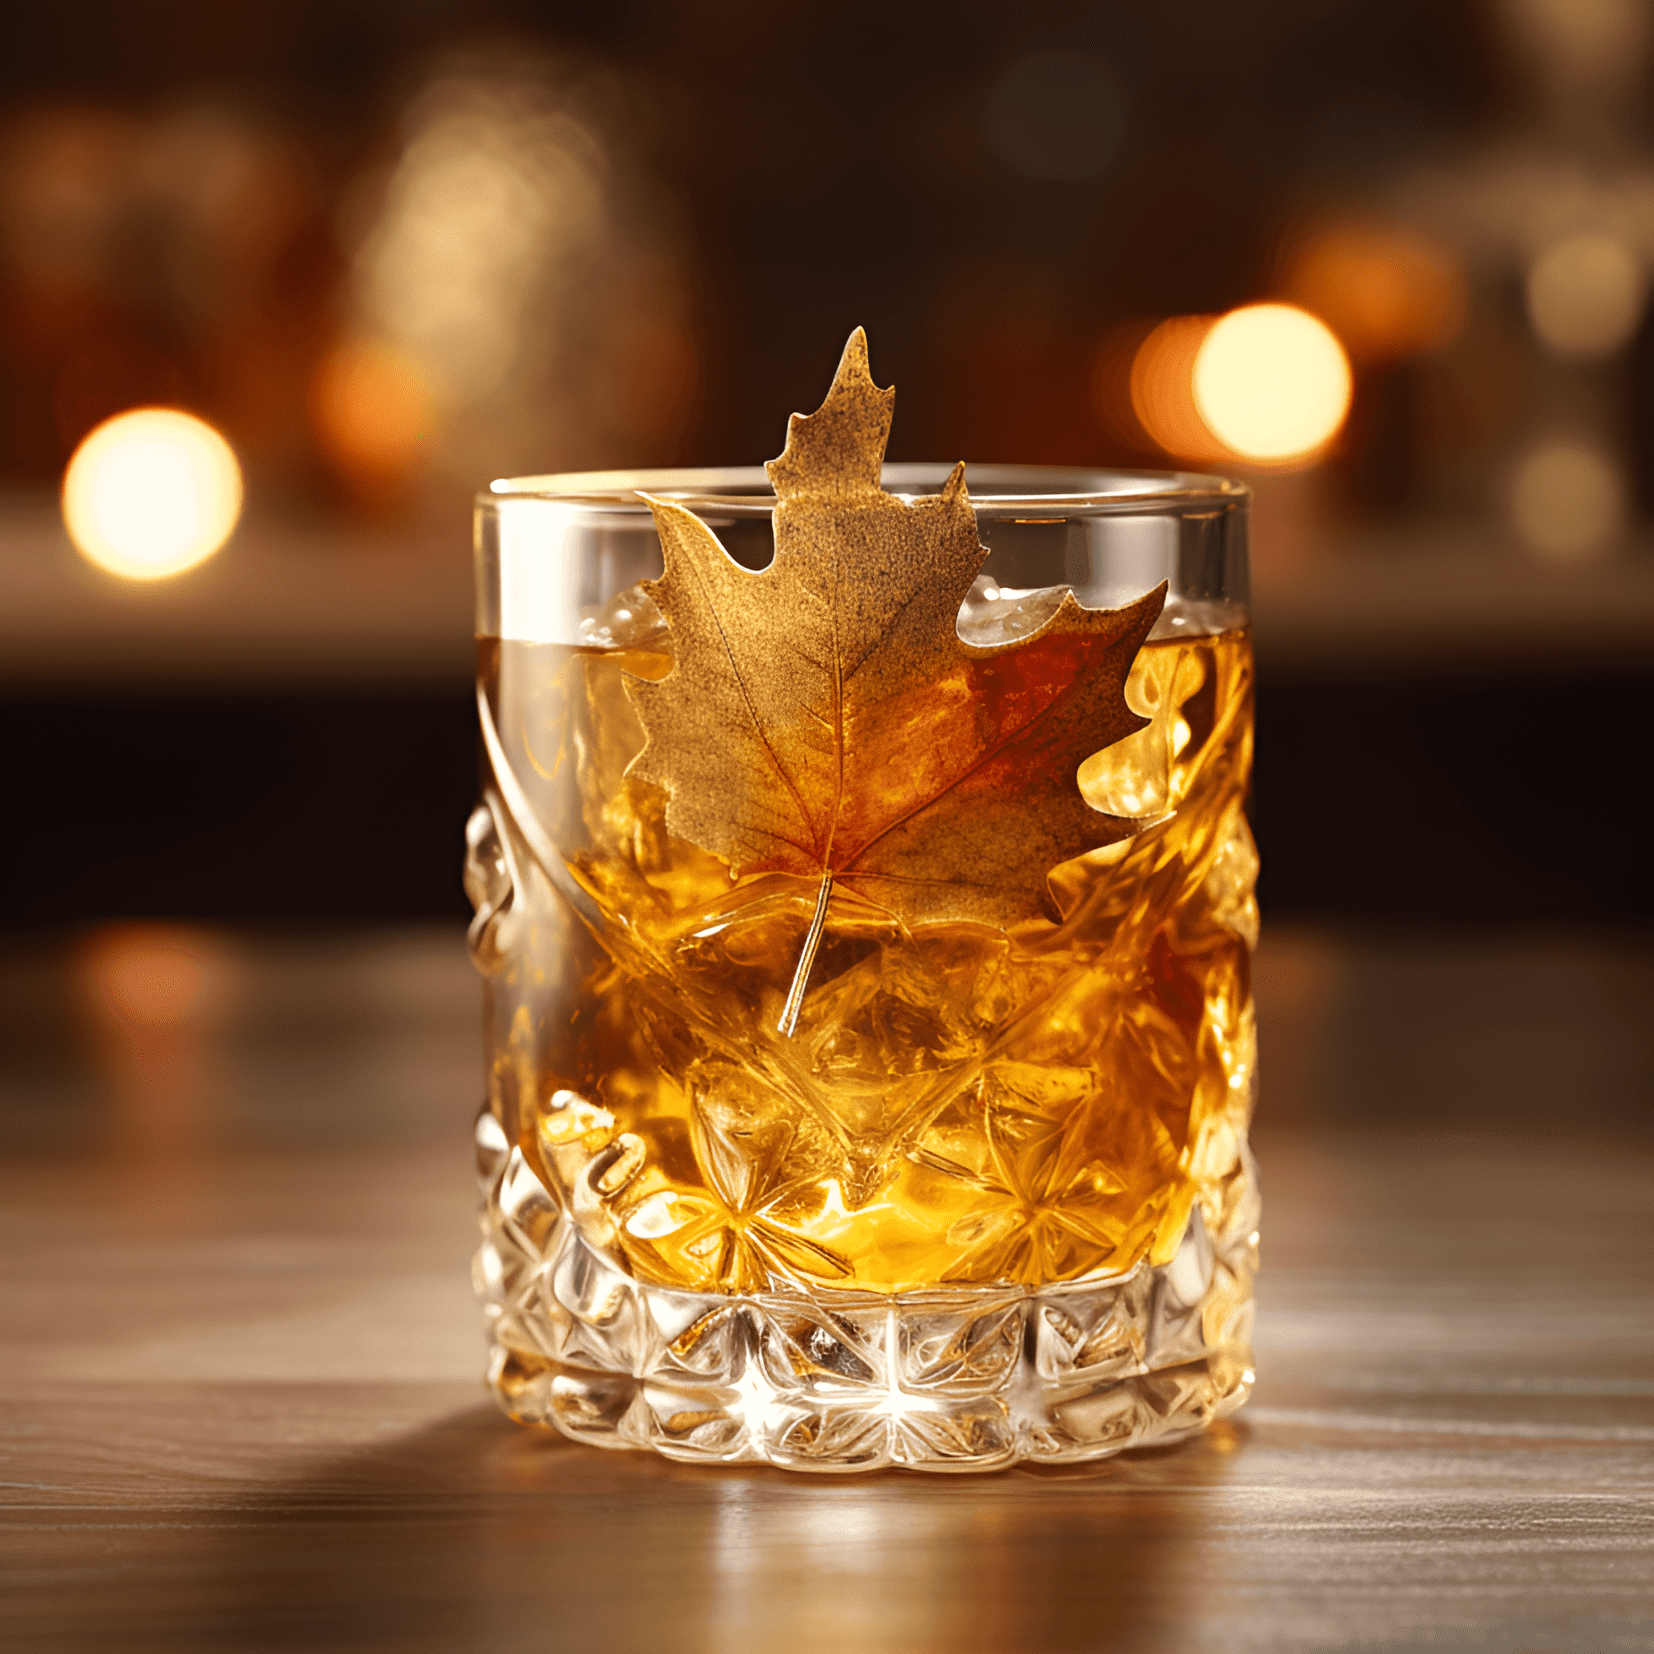 The Maple Leaf cocktail is a well-balanced mix of sweet, sour, and strong flavors. The whiskey provides a robust, warming base, while the maple syrup adds a rich sweetness. The lemon juice brings a refreshing tartness, and the overall taste is smooth and satisfying.